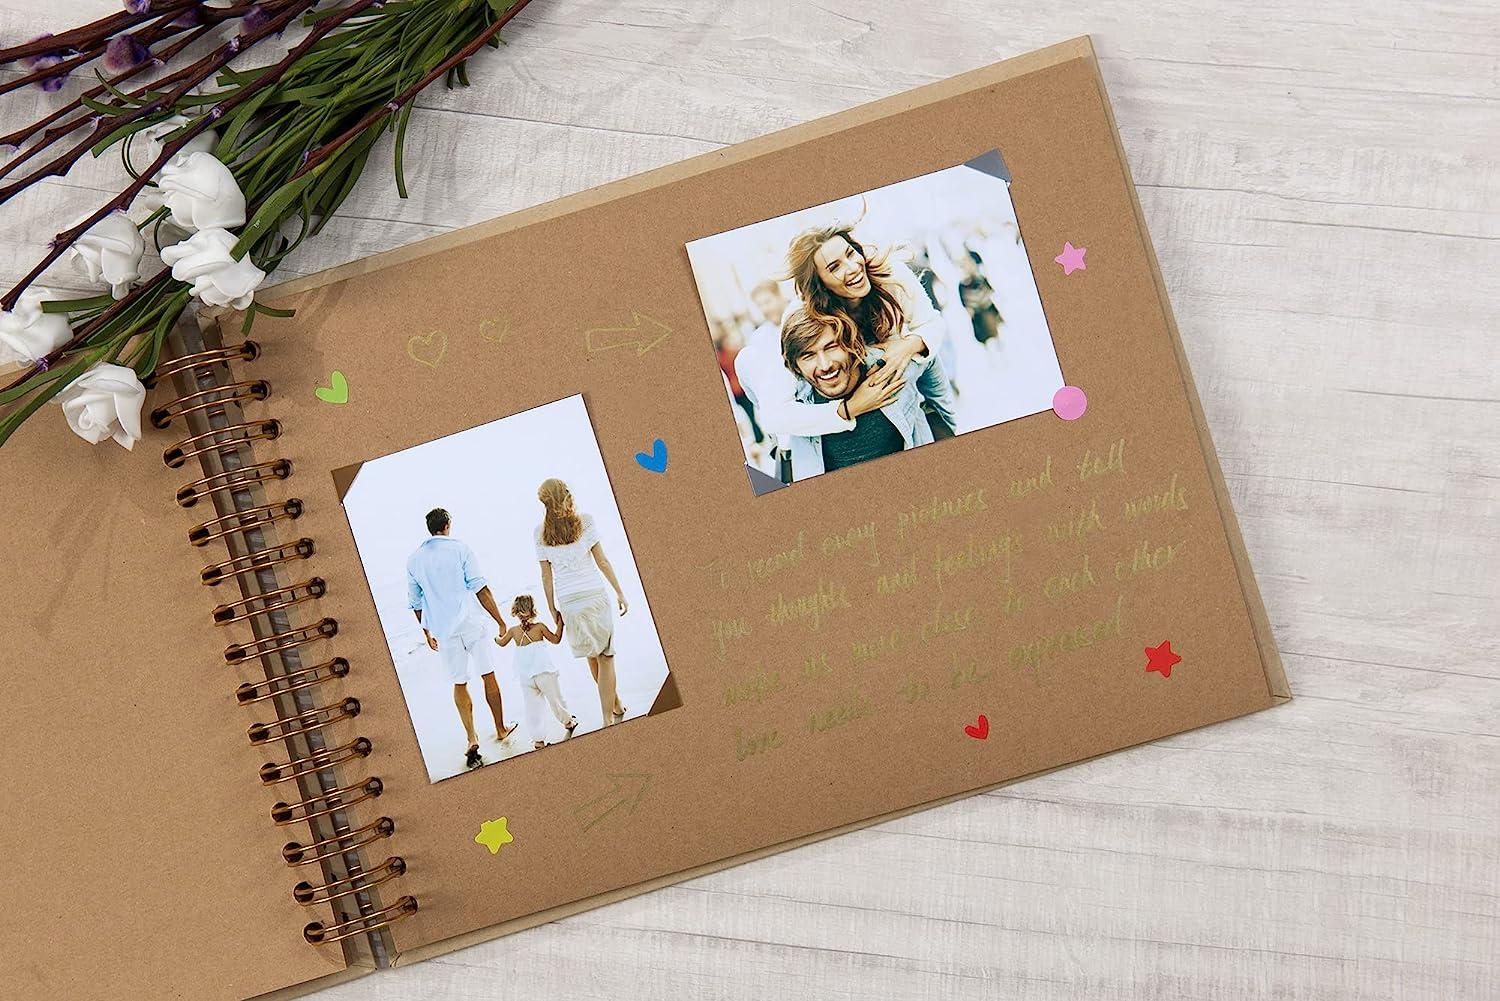  PATIKIL Scrapbook Album, 1Pcs Coil DIY Horizontal Album  Scrapbook Photo Album, Guest Book DIY Memory Book with 40 Sheets Khaki  Pages, for Christmas Anniversary Birthday Gift,Khaki